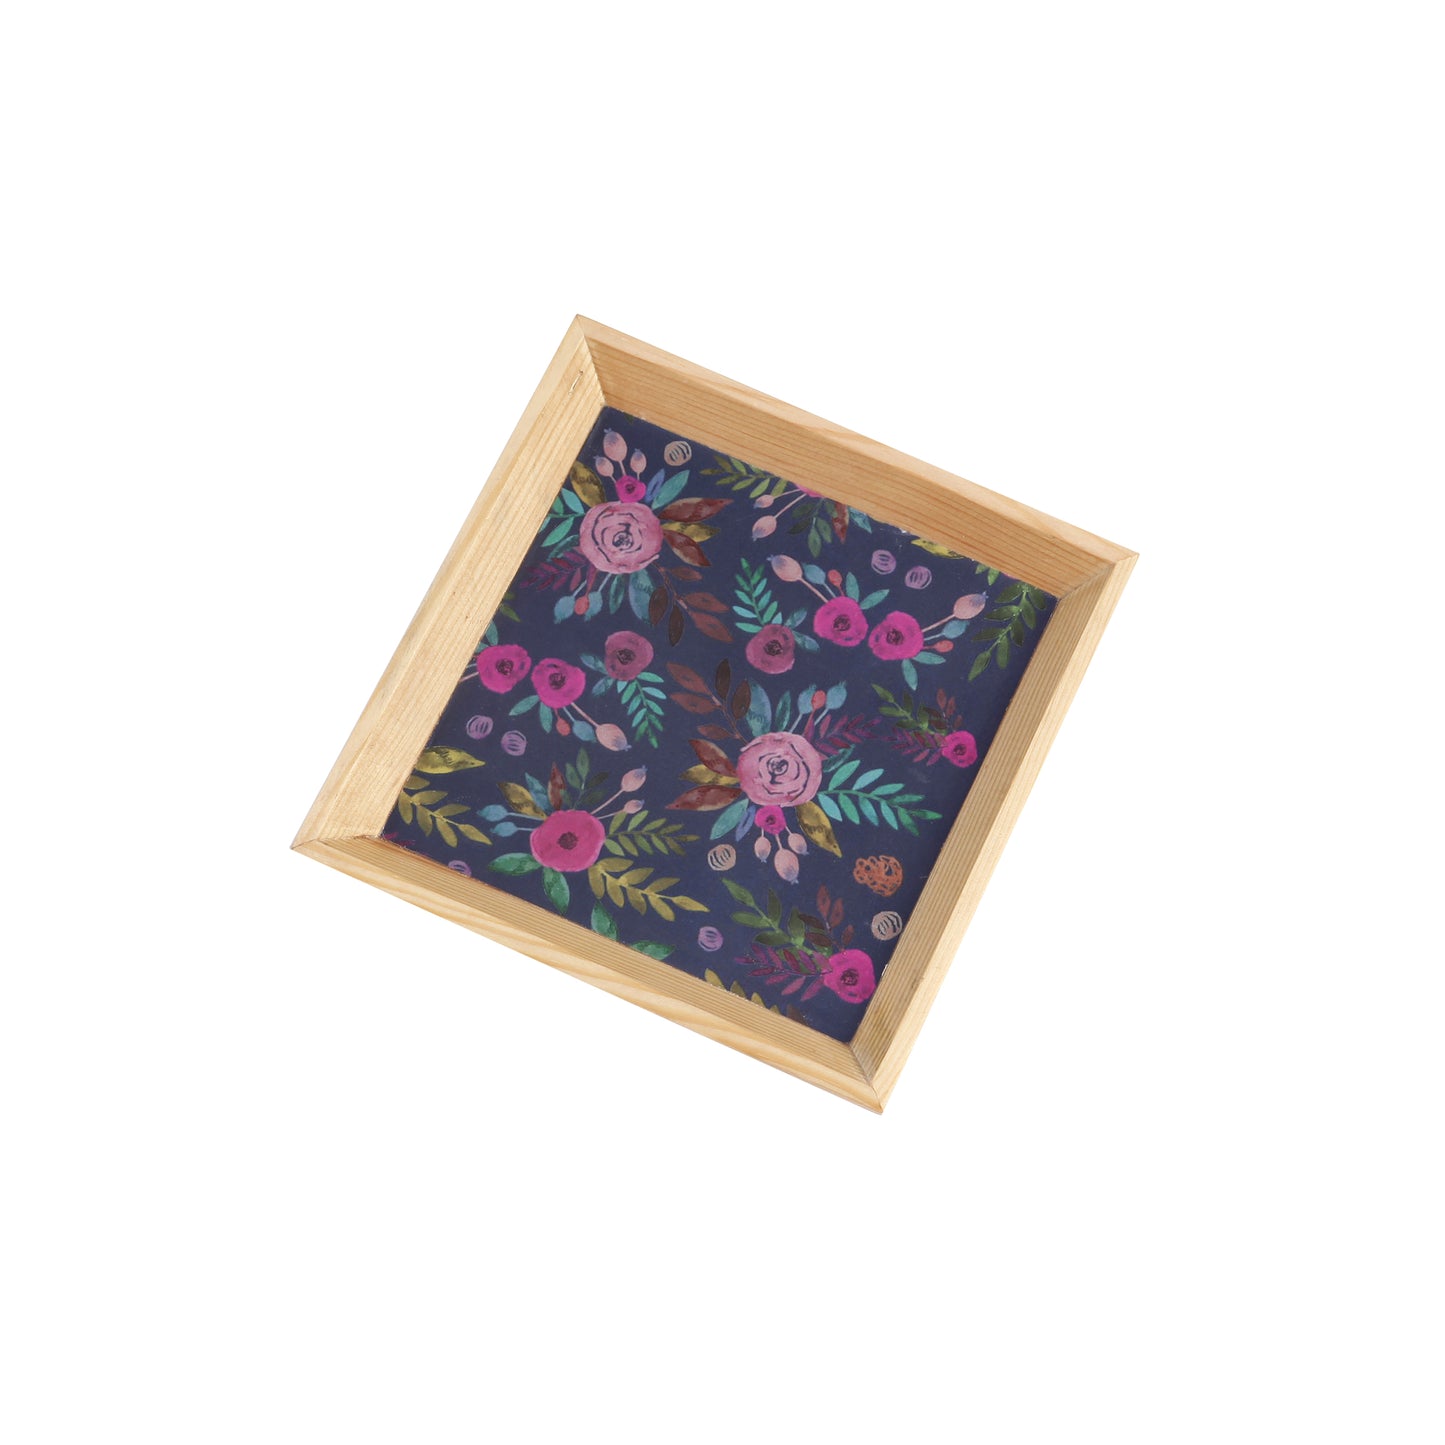 A Tiny Mistake Blue Floral Pattern Small Square Wooden Serving Tray, 18 x 18 x 2 cm